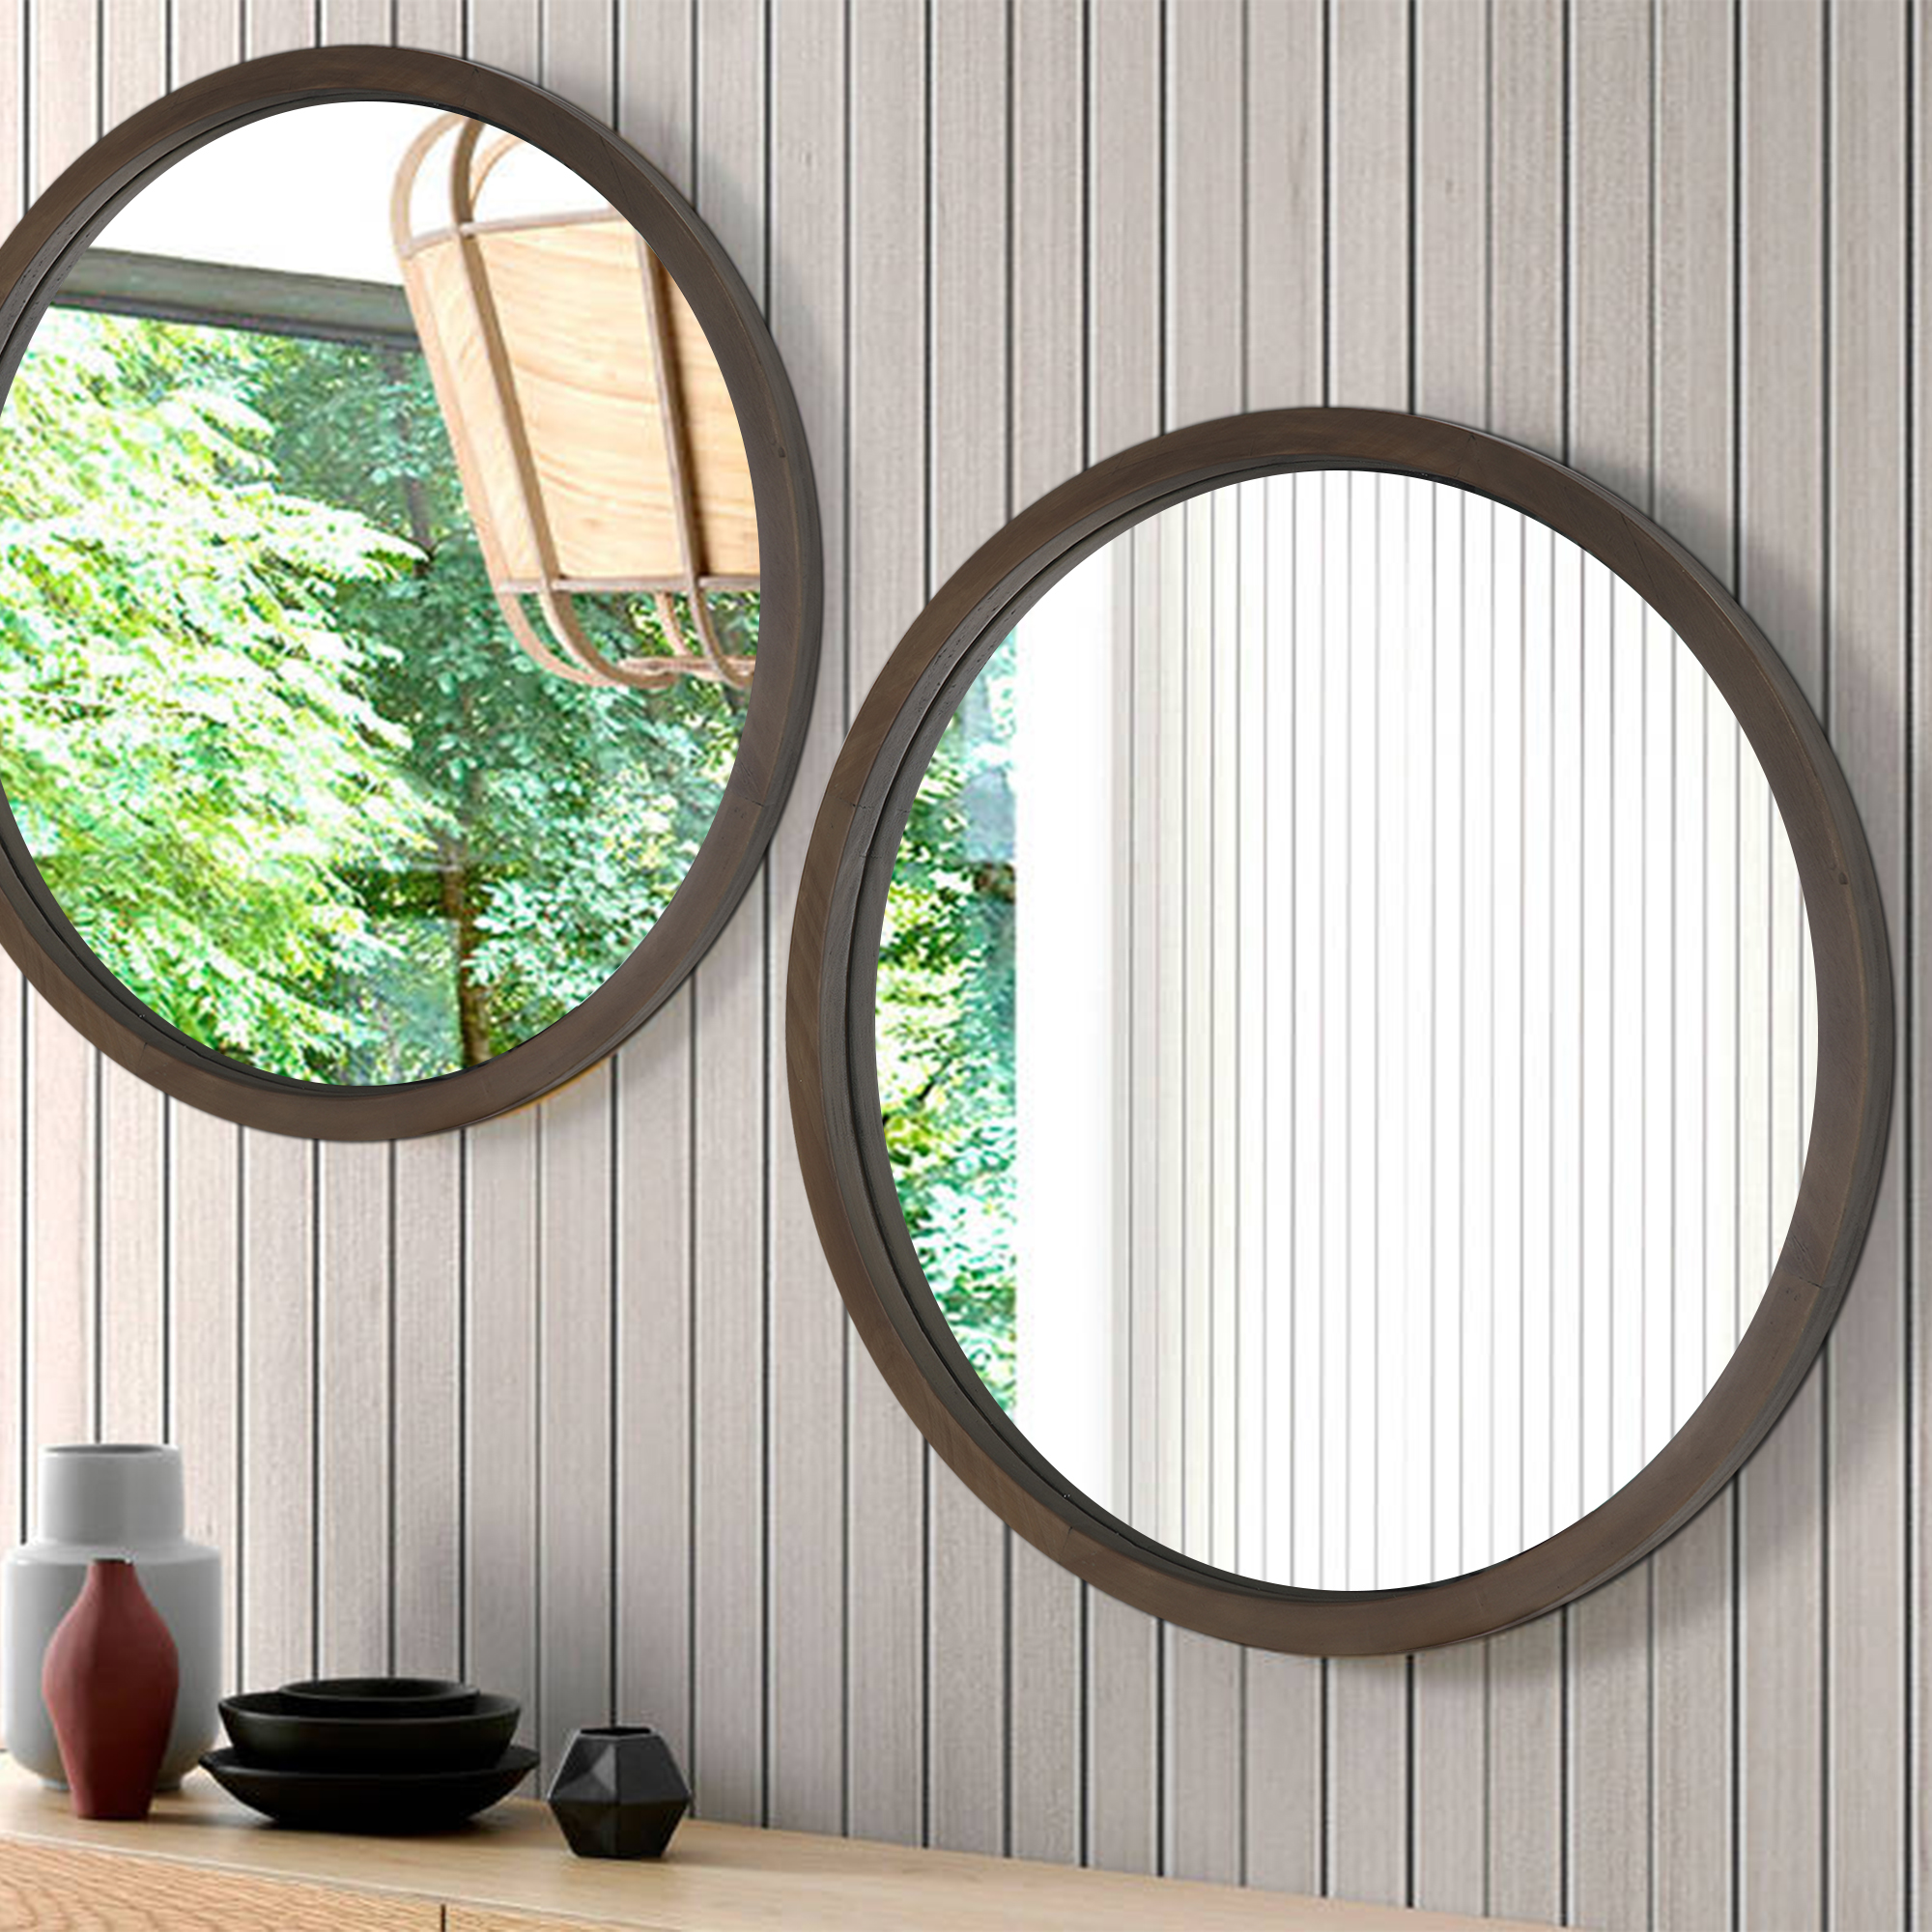  Clavie Bathroom Mirror, Black Round Mirror 24 x 24 inch Modern  Metal Frame Circle Mirror Wall Mounted Decorative Mirror for Bedroom Living  Room Entryway : Home & Kitchen